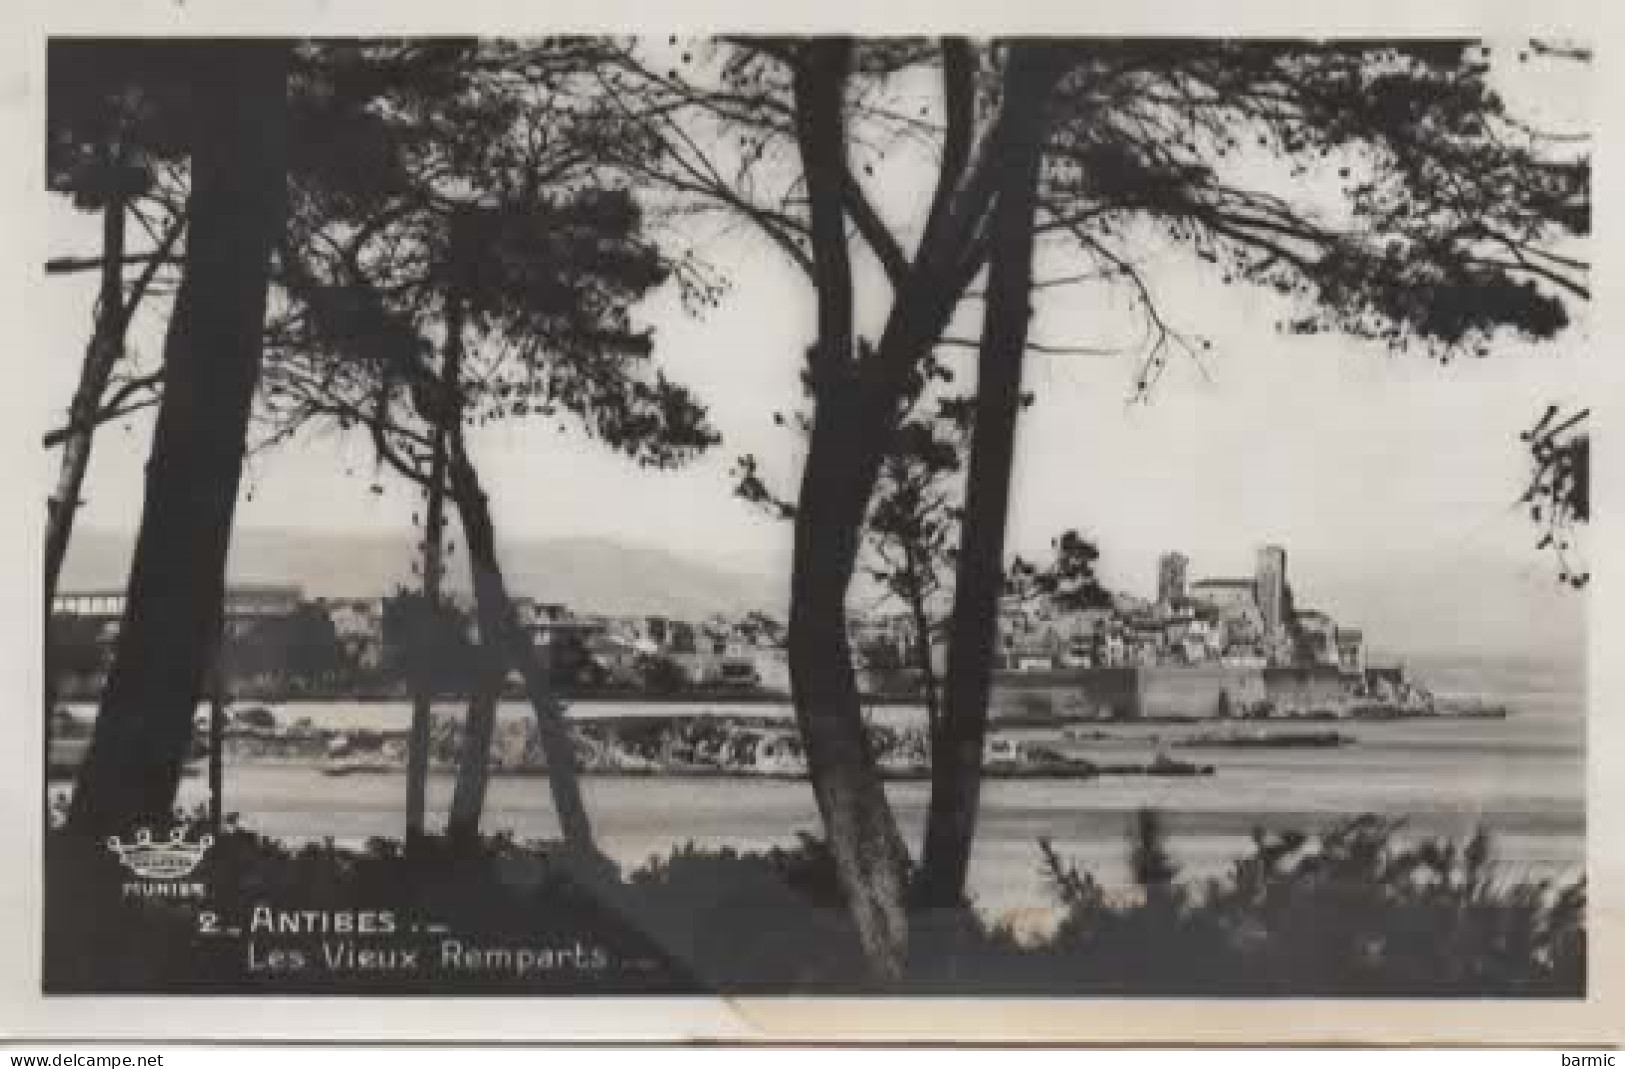 ANTIBES, LES REMPARTS REF 15839 - Antibes - Les Remparts